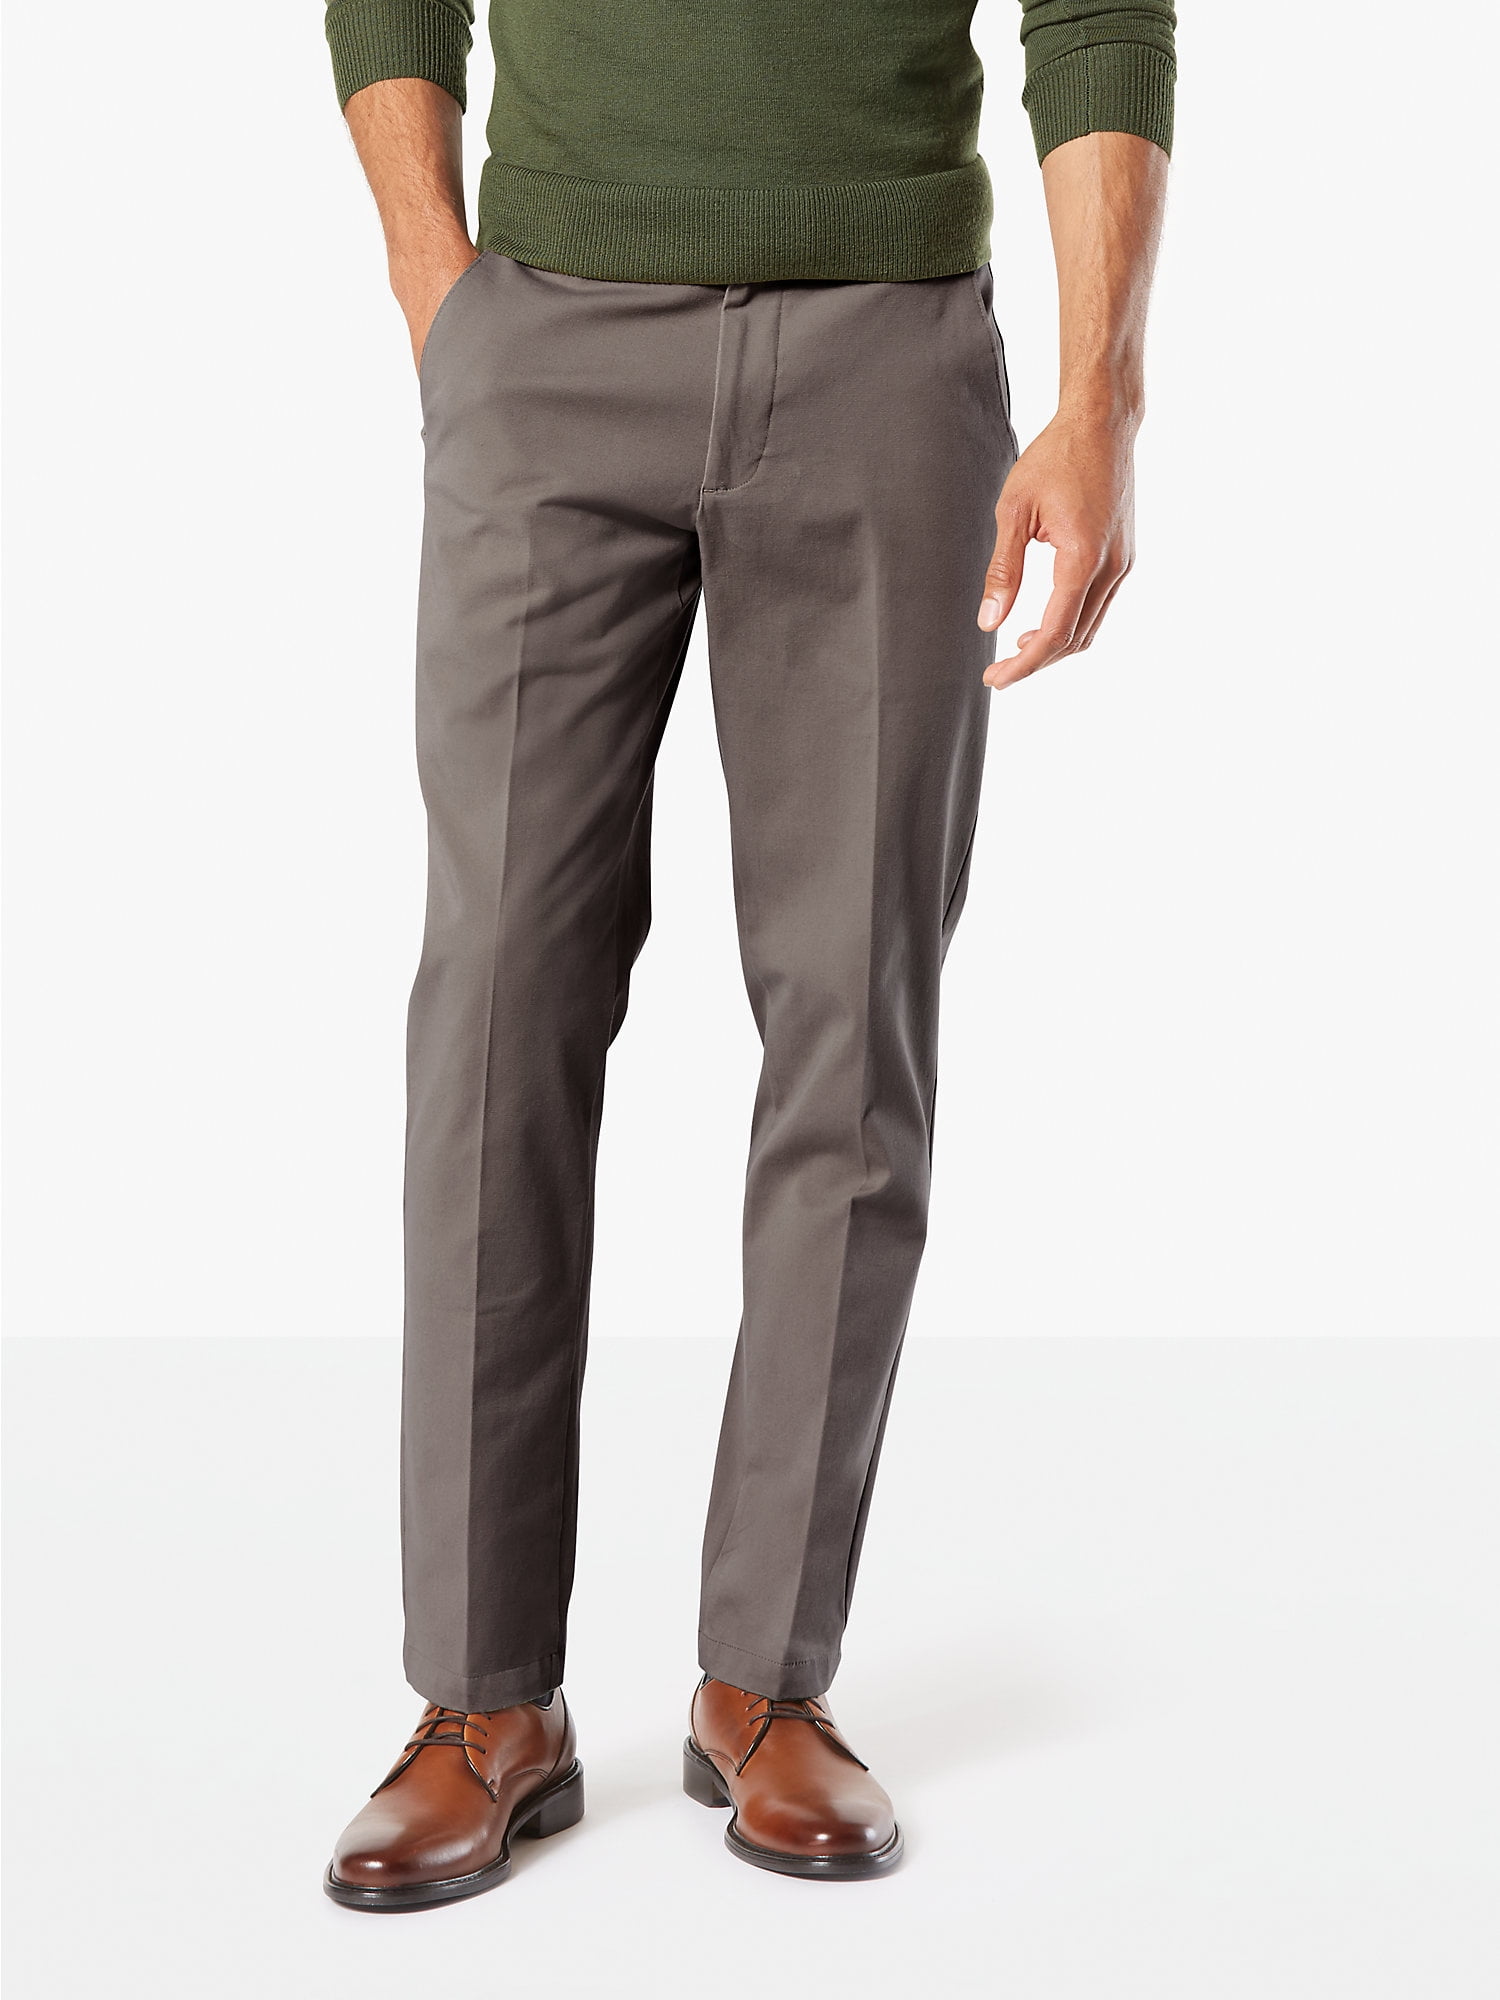 Slim Fit Trousers  Buy Slim Fit Trousers Online in India